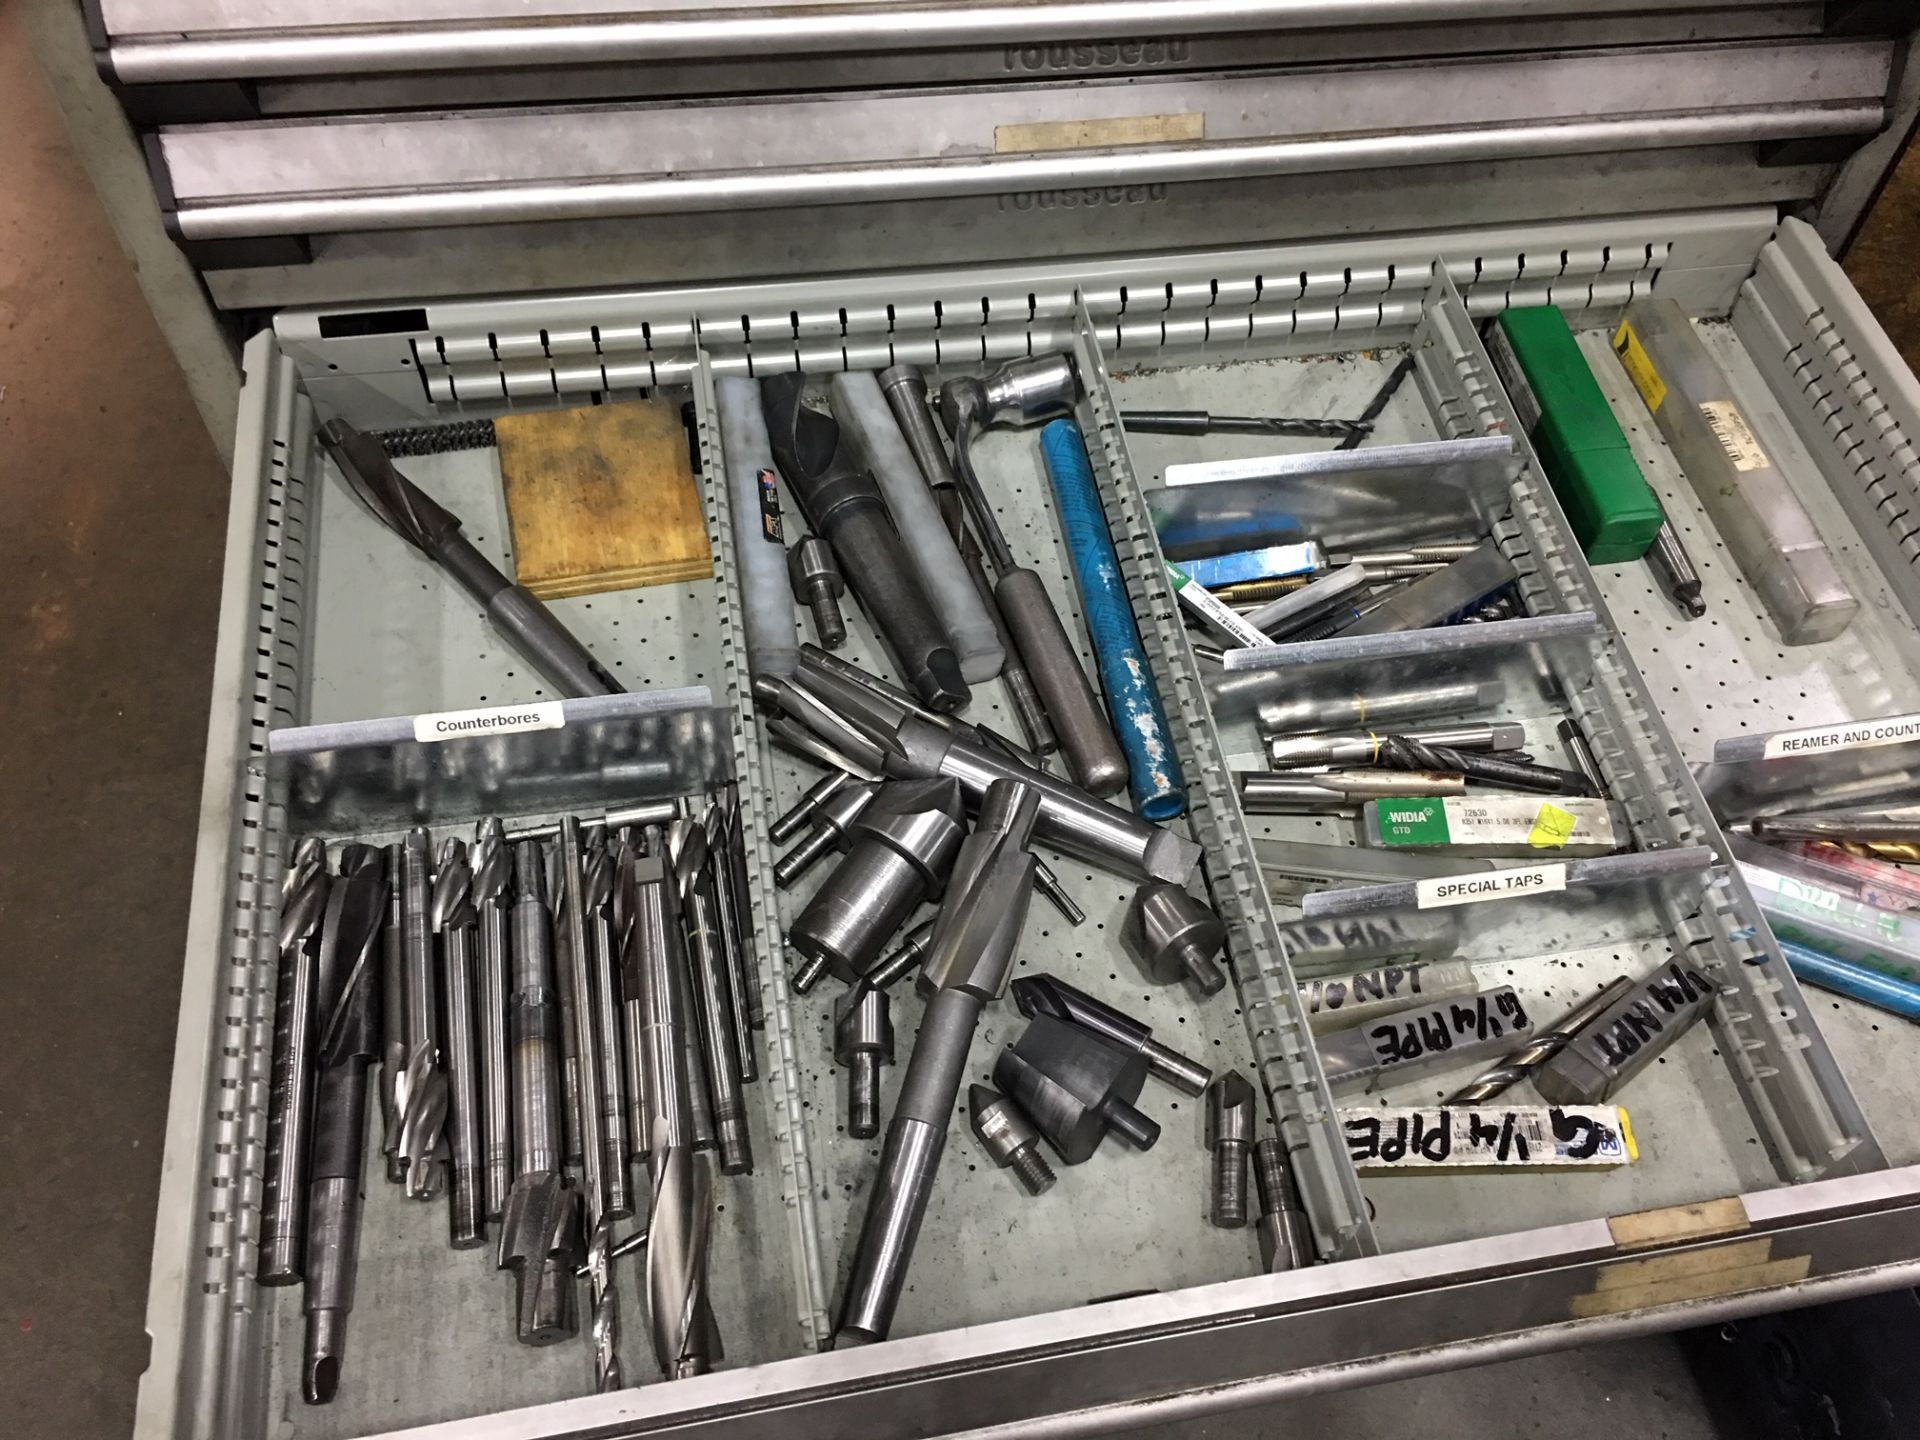 7 Drawer Global Cabinet w/ Drills, Bolts, and Reamers - Image 5 of 6